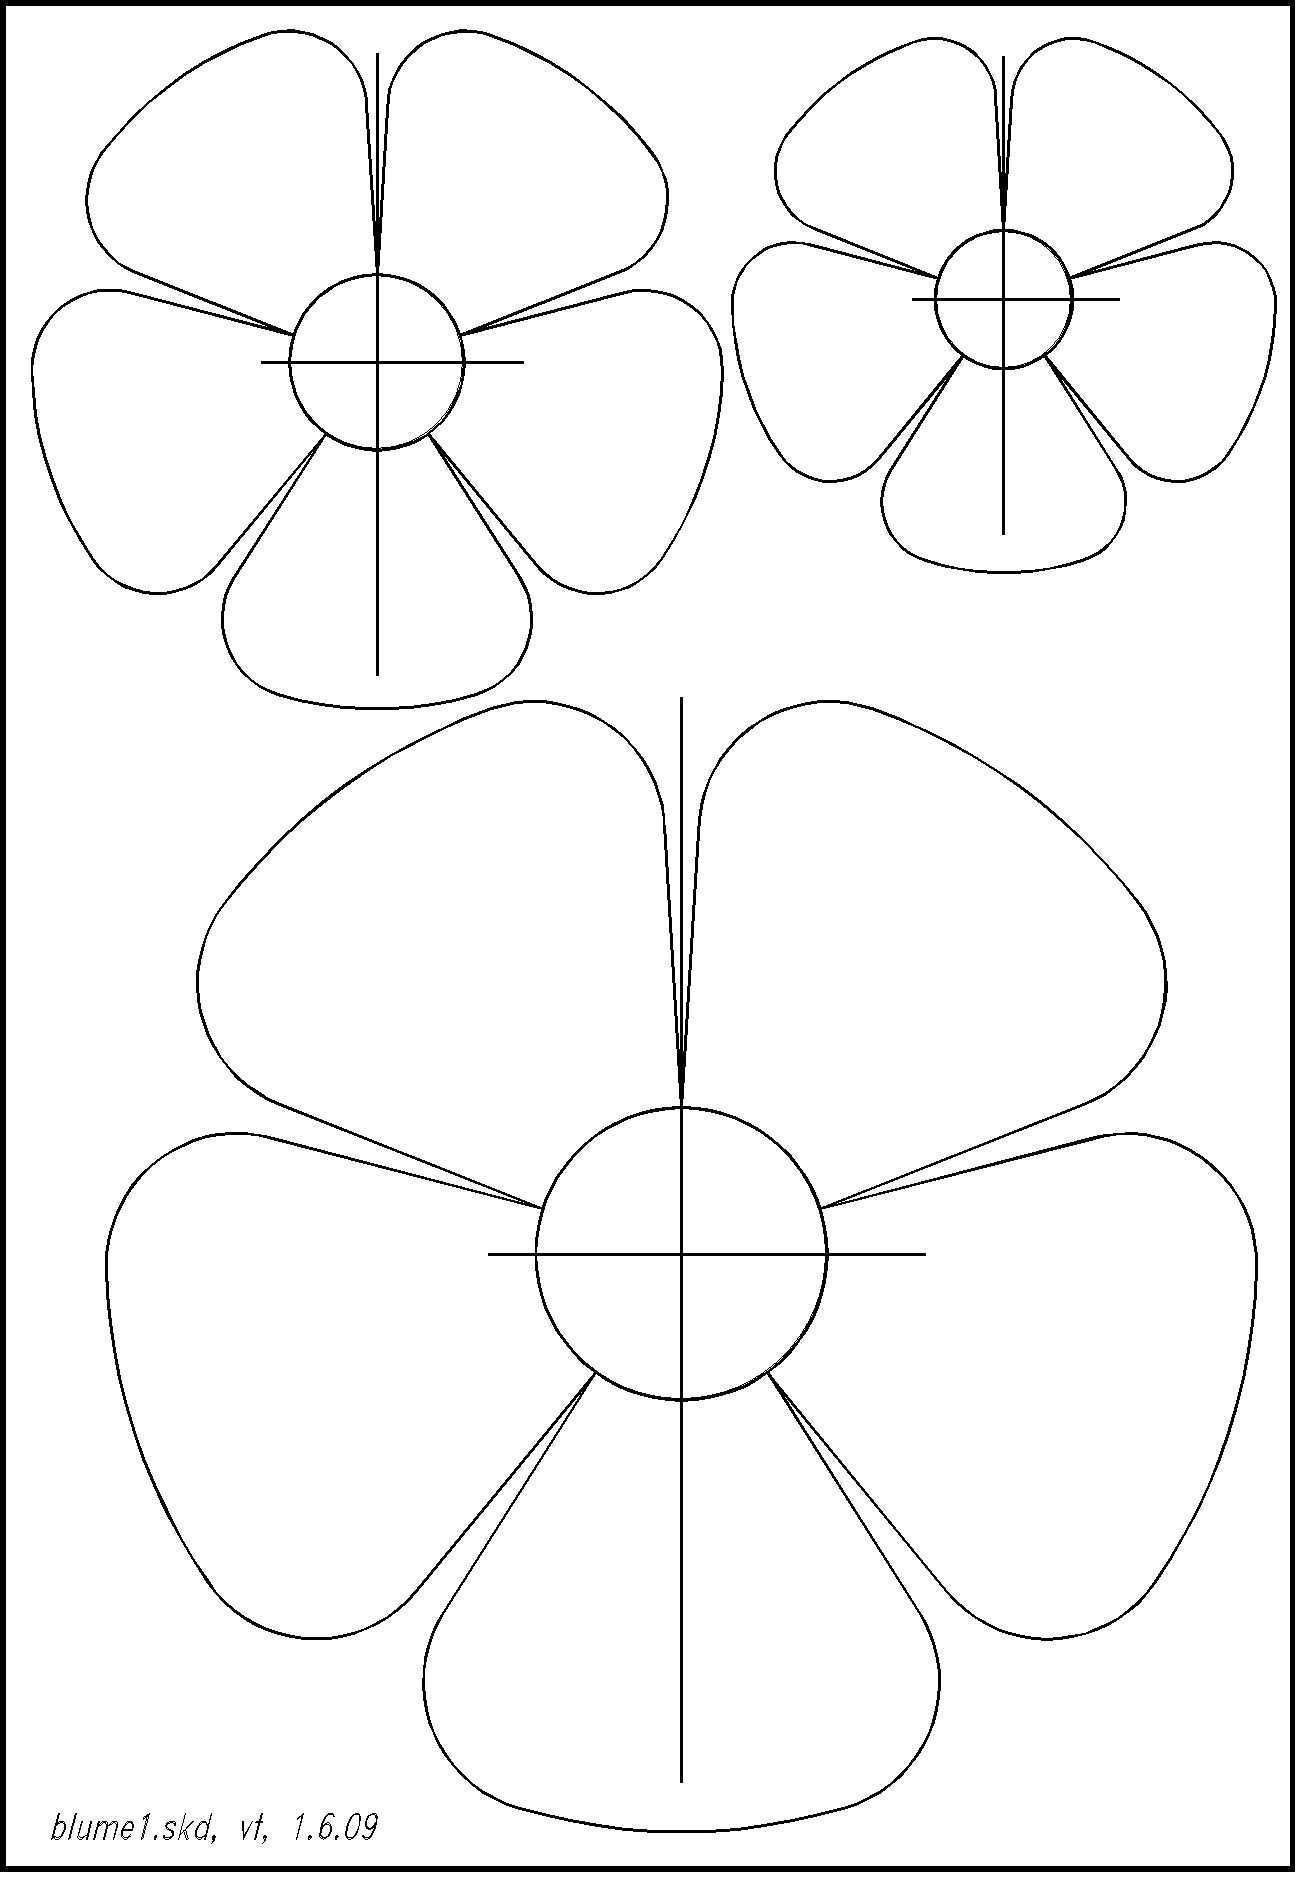 Pin Von Only Coloring Pages Auf Paper Craft Vorlagen Blumen Basteln Blumen Basteln Blumen Schablone